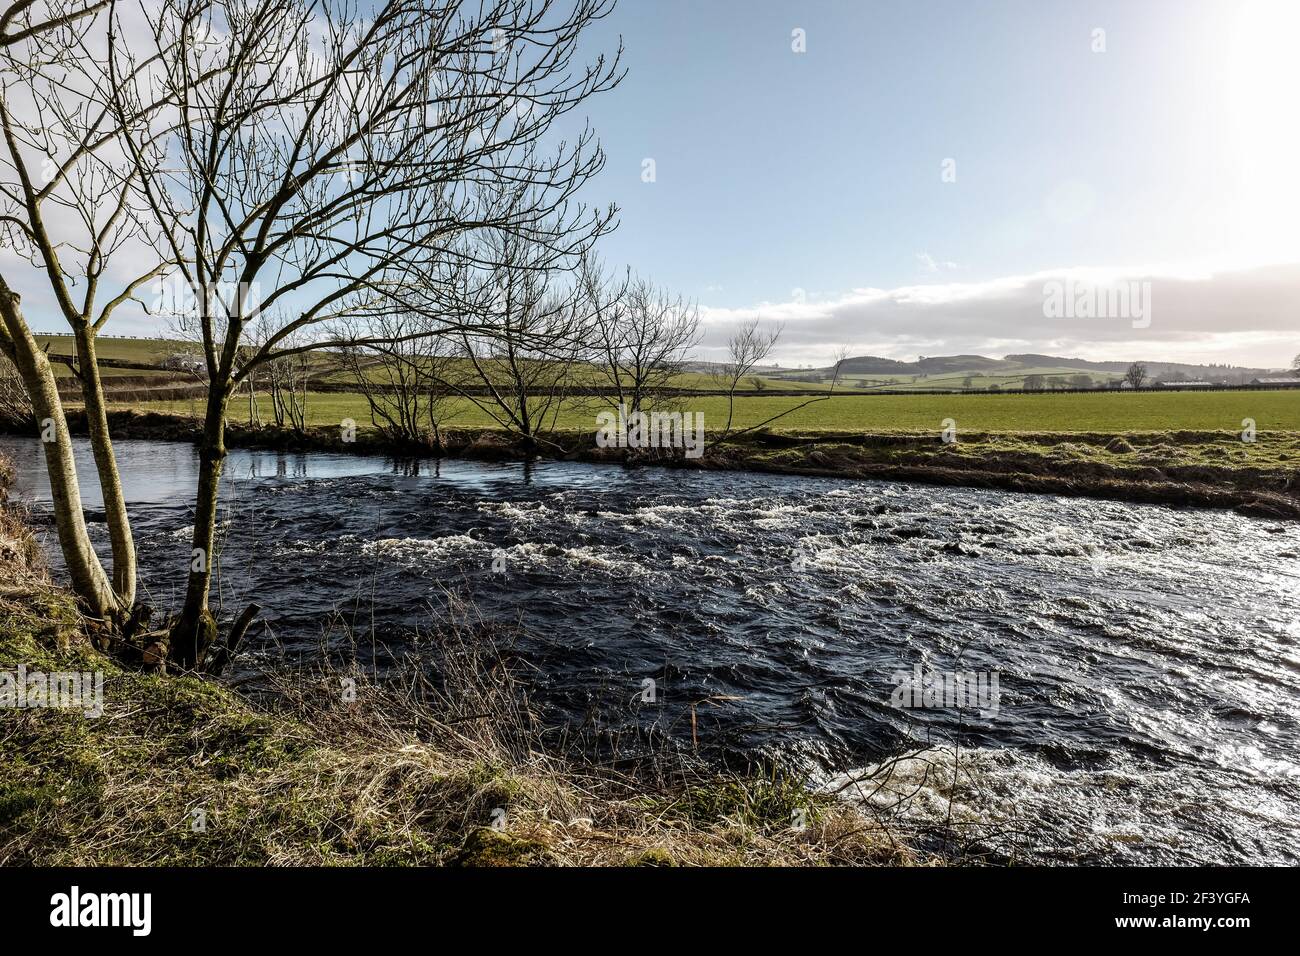 Afternoon view across the River Doon to Scottish countryside near the Ayrshire village of Dalrymple Stock Photo